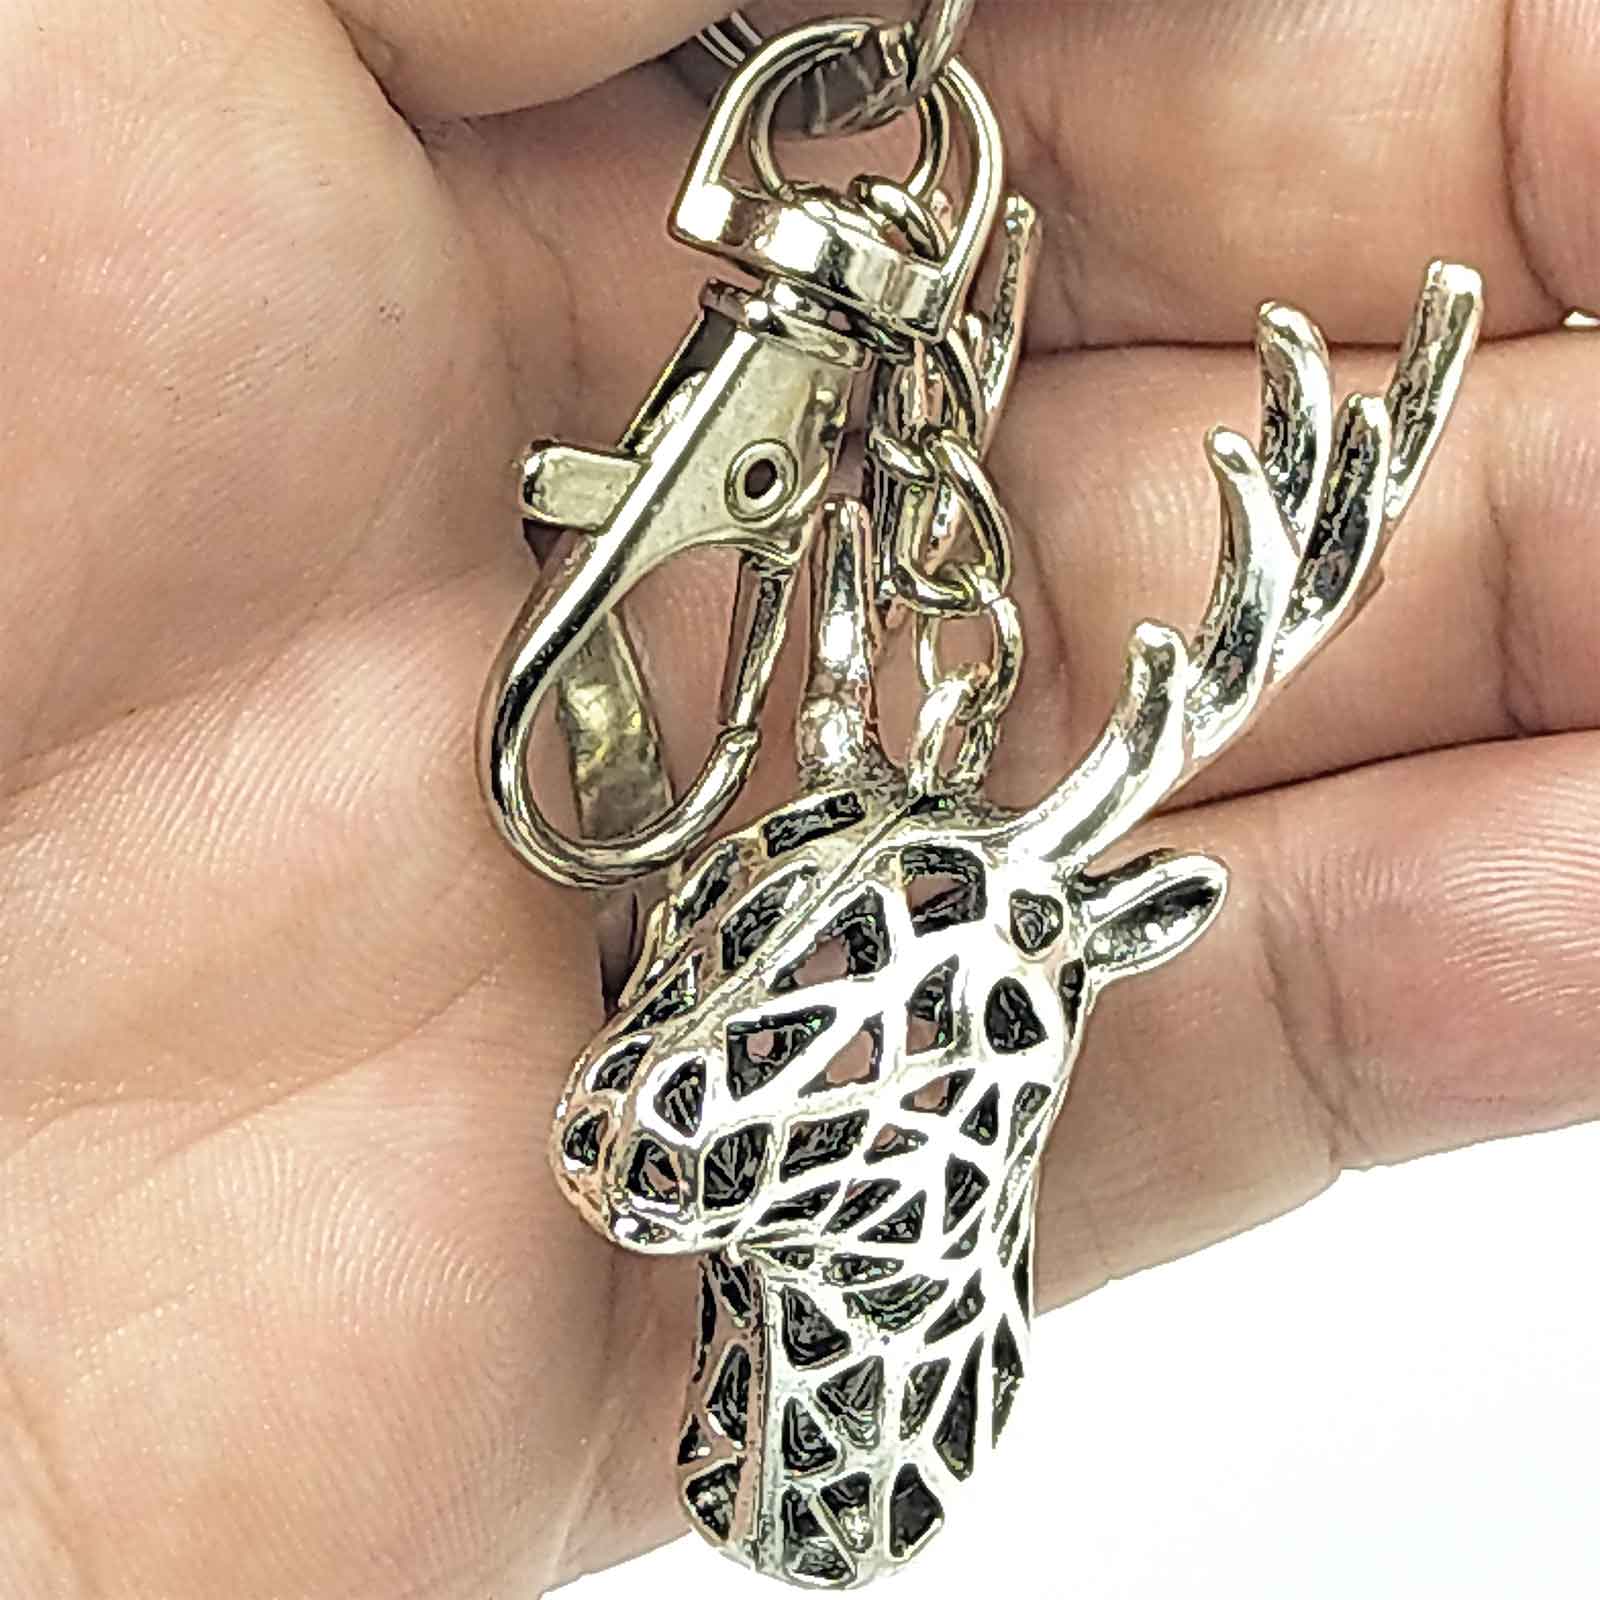 Stunning 3D Deer Stag Head Silver Metals Keyring Gift - Bag Charms & Keyrings by Fashion Accessories